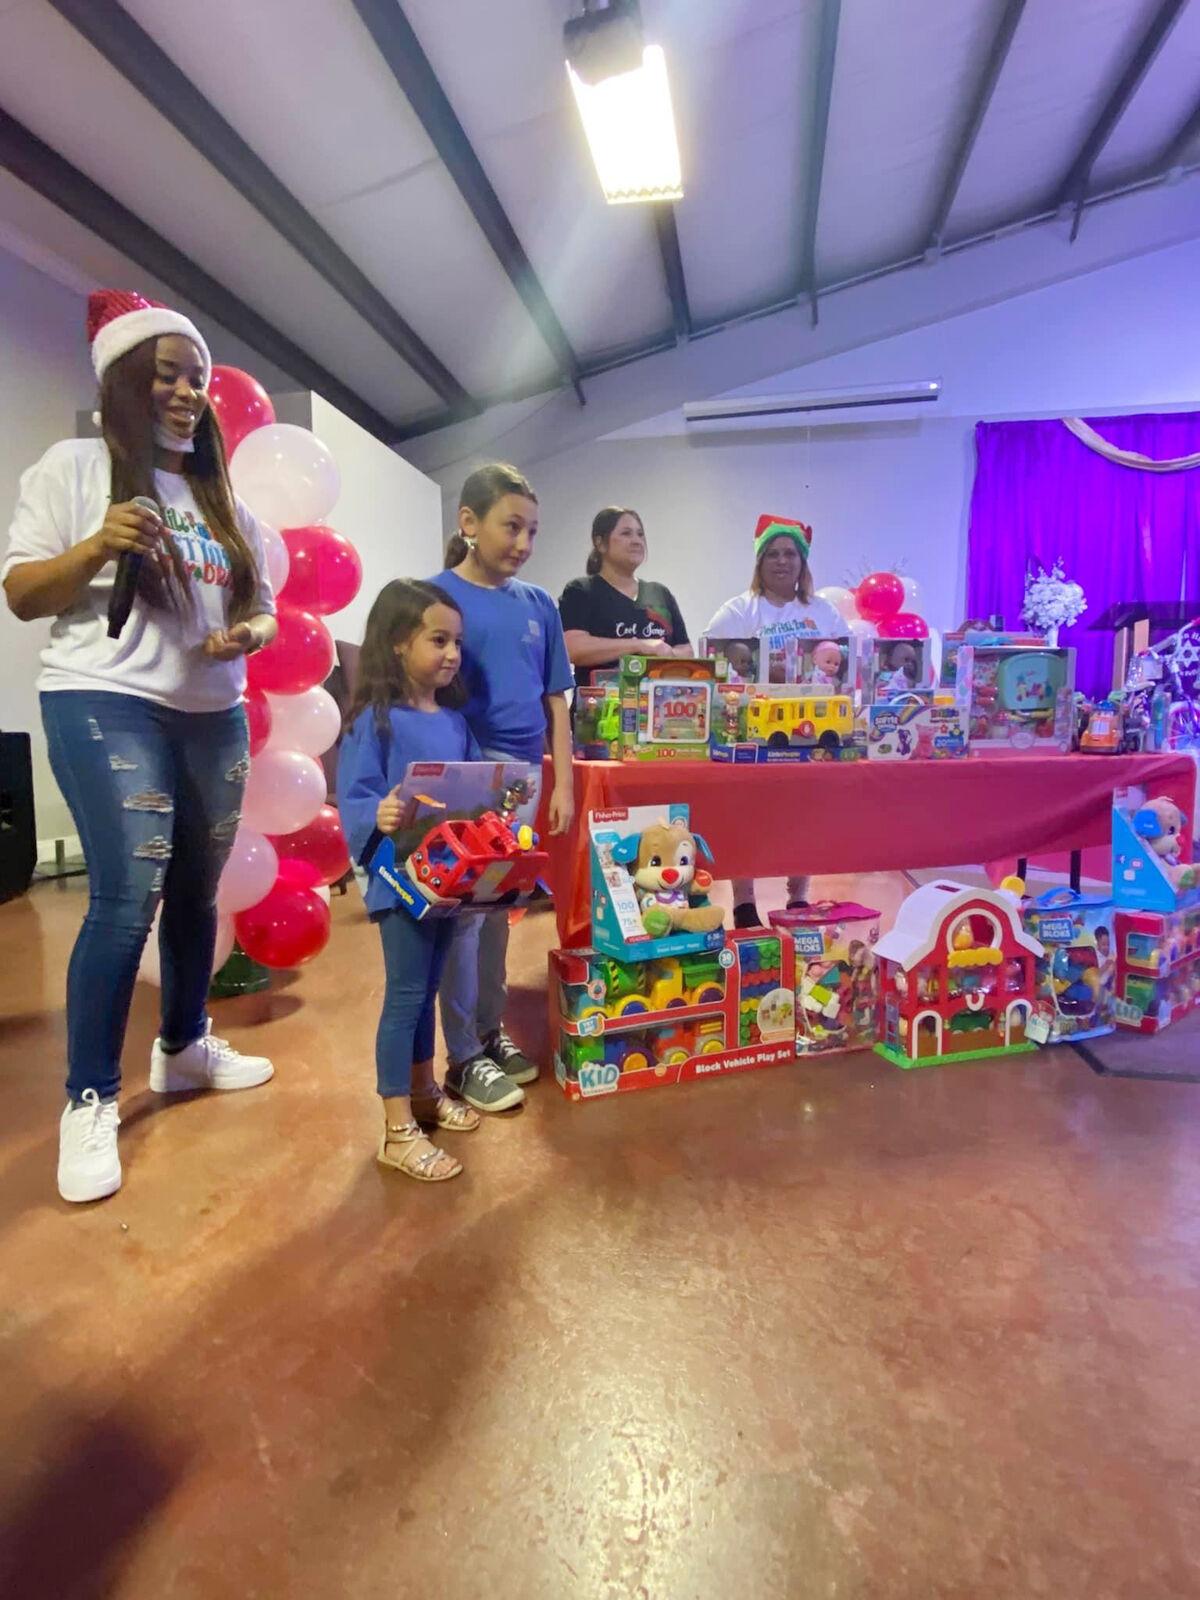 Zion Hill toy giveaway brings joy to nearly 300 kids